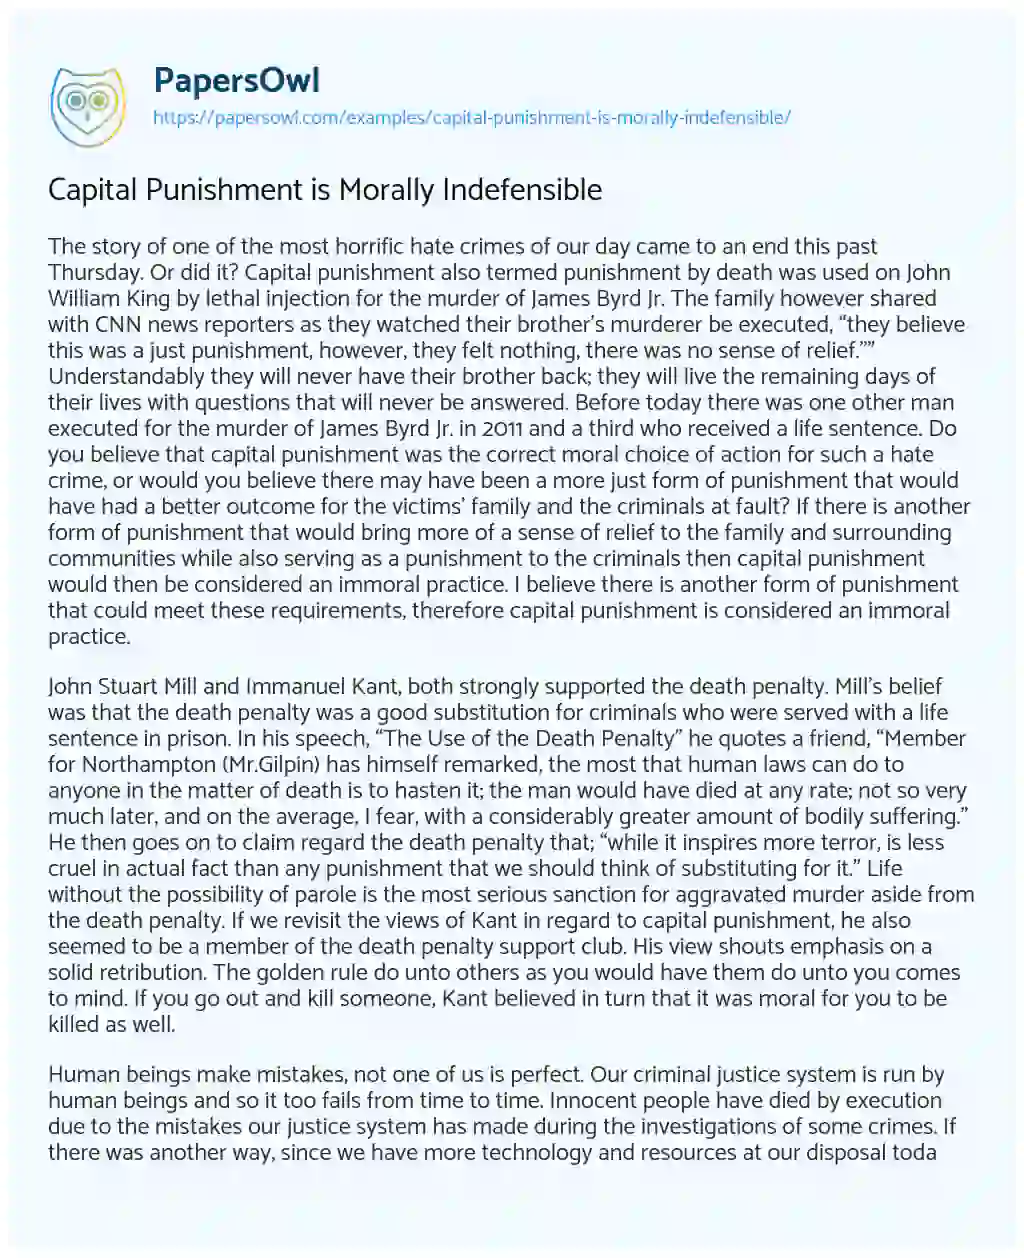 Essay on Capital Punishment is Morally Indefensible